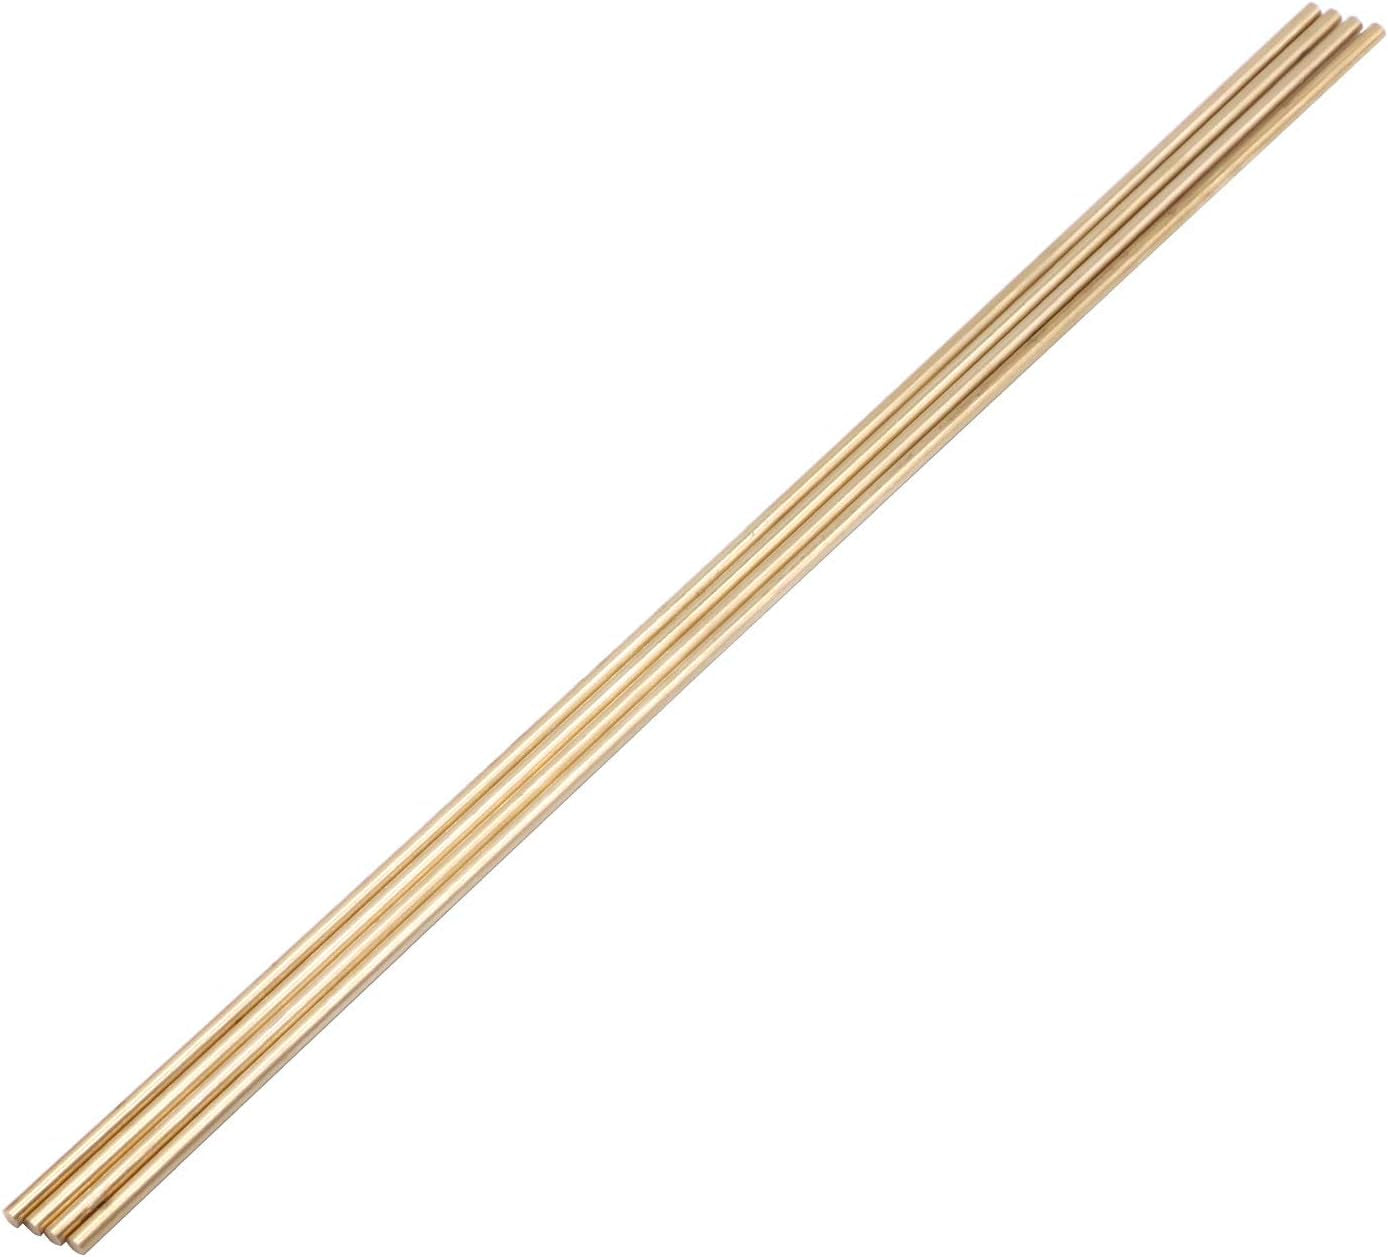 4Pcs Solid round Brass Rod Lathe Bar Stock Kit for DIY Craft Tool, 1/8 Inch in Diameter 12 Inch in Length